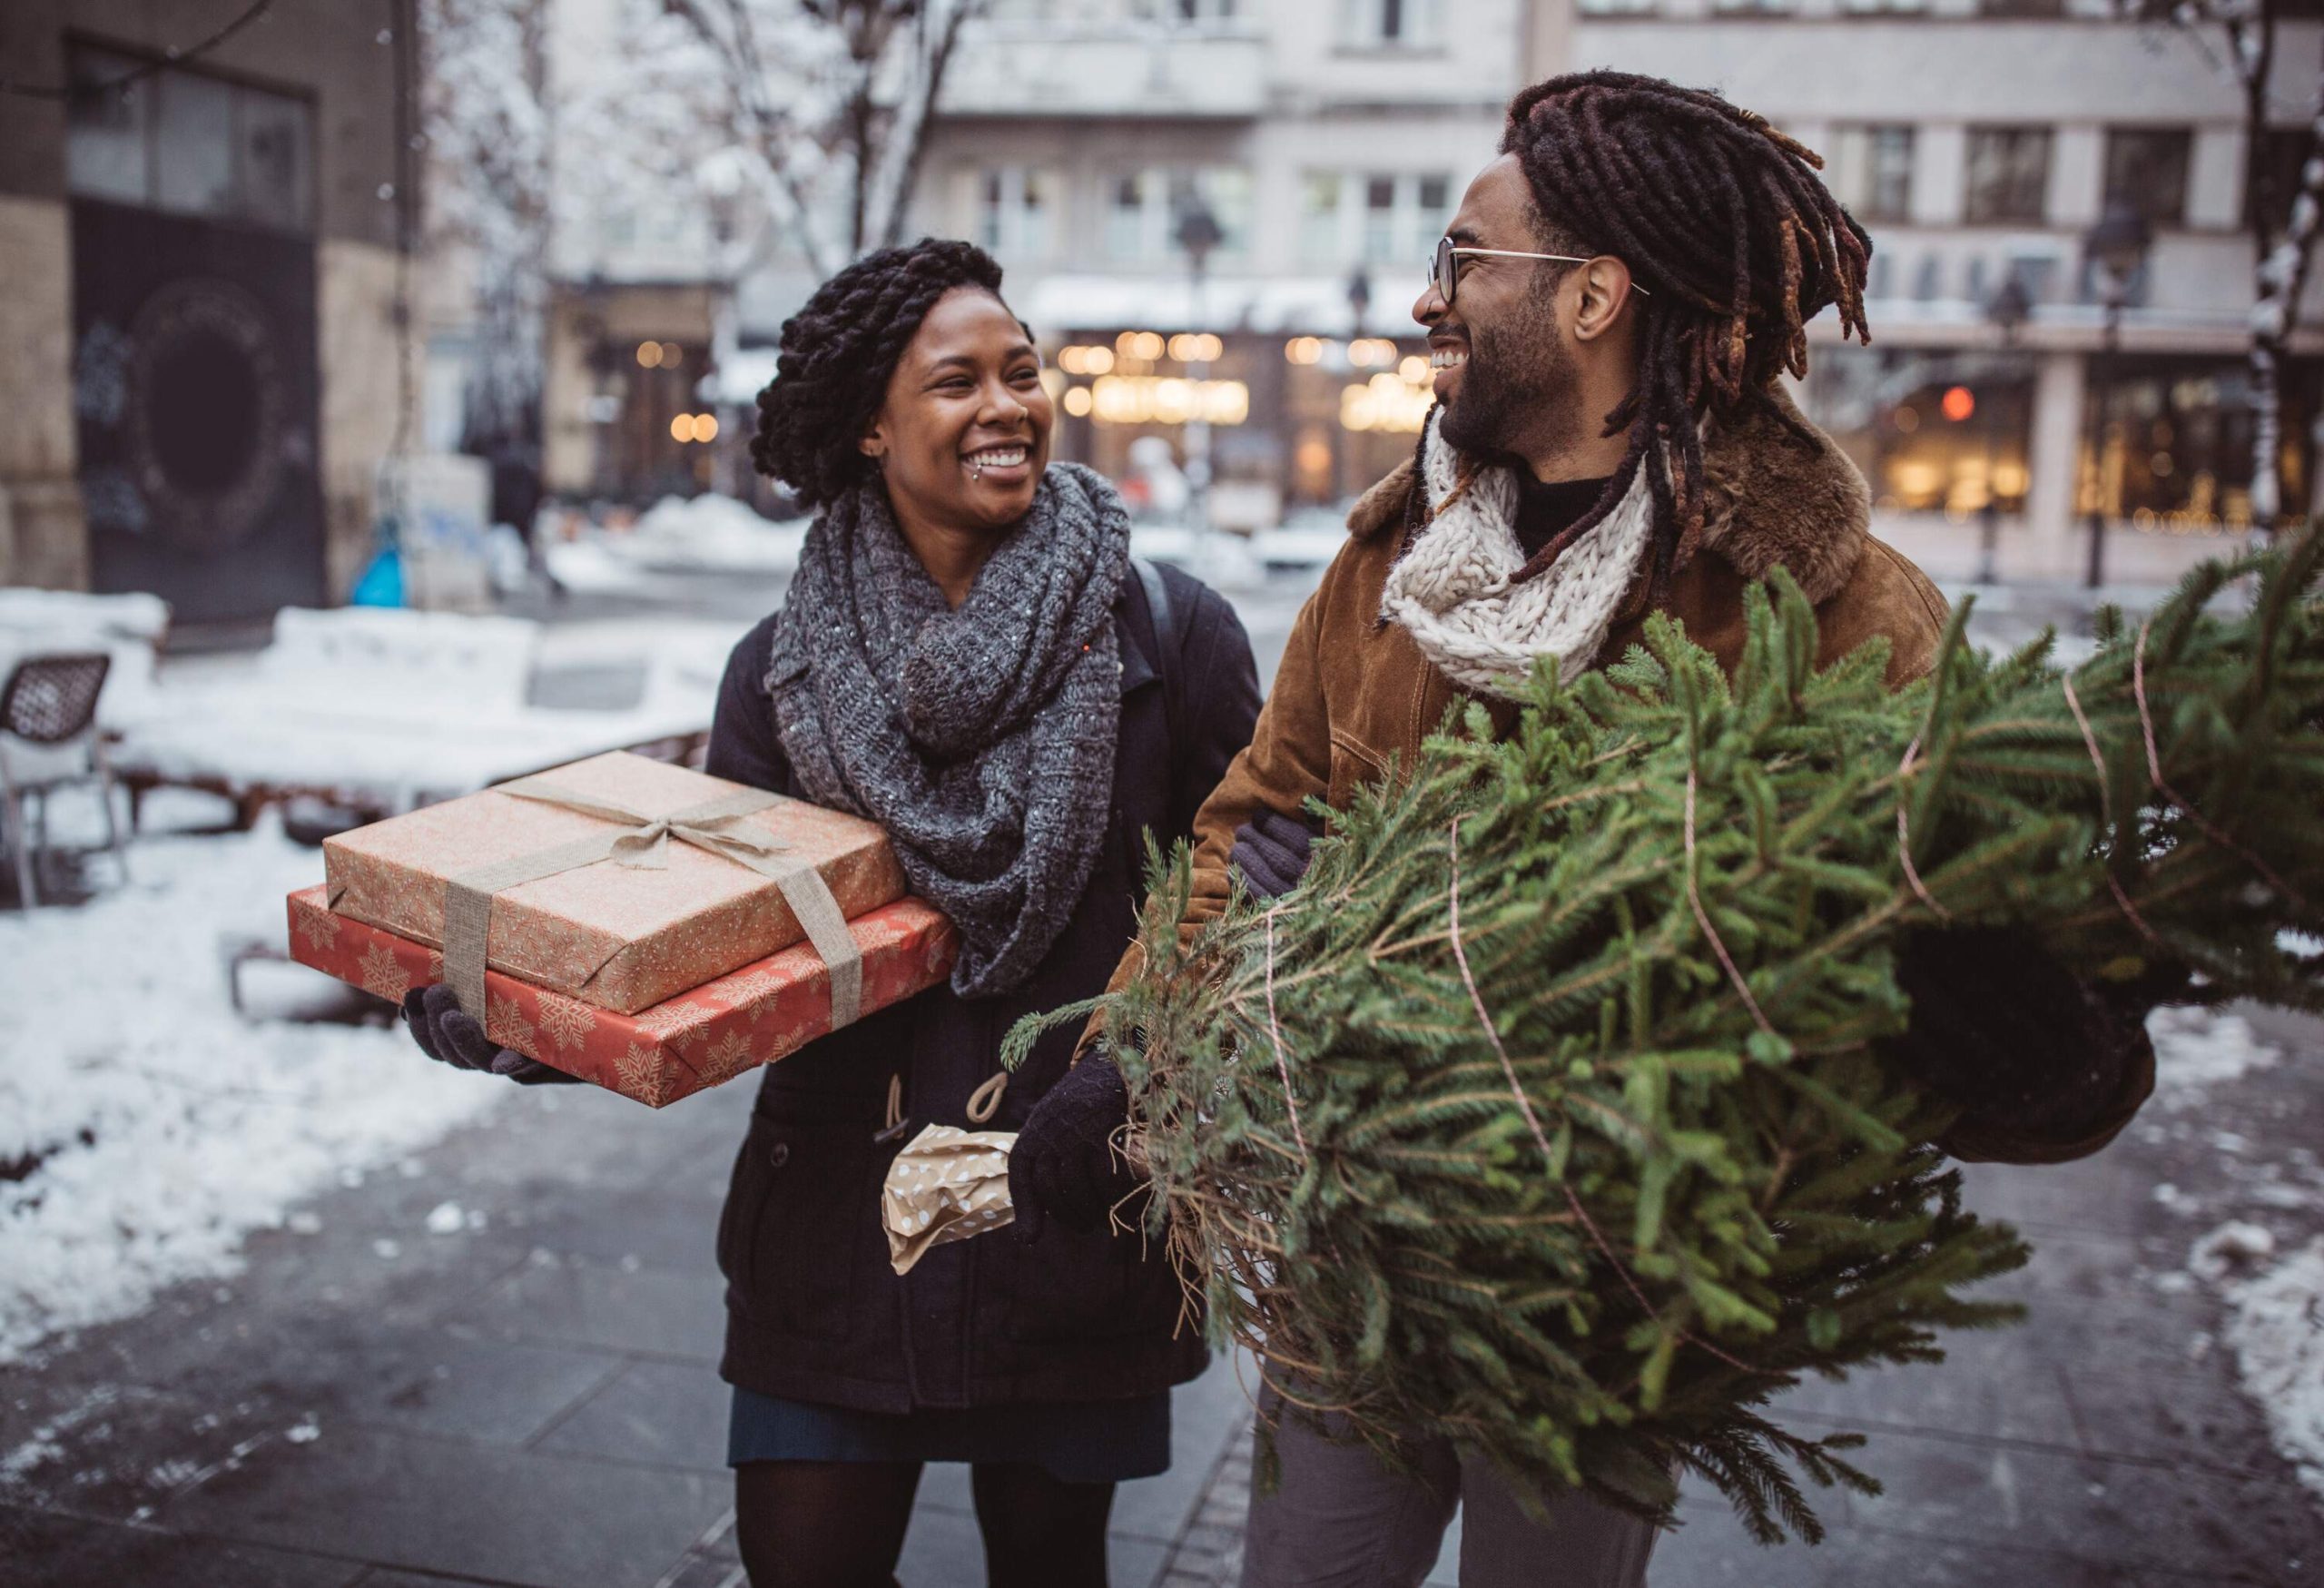 A couple in winter clothes smile at each other as they carry wrapped gifts and Christmas tree.